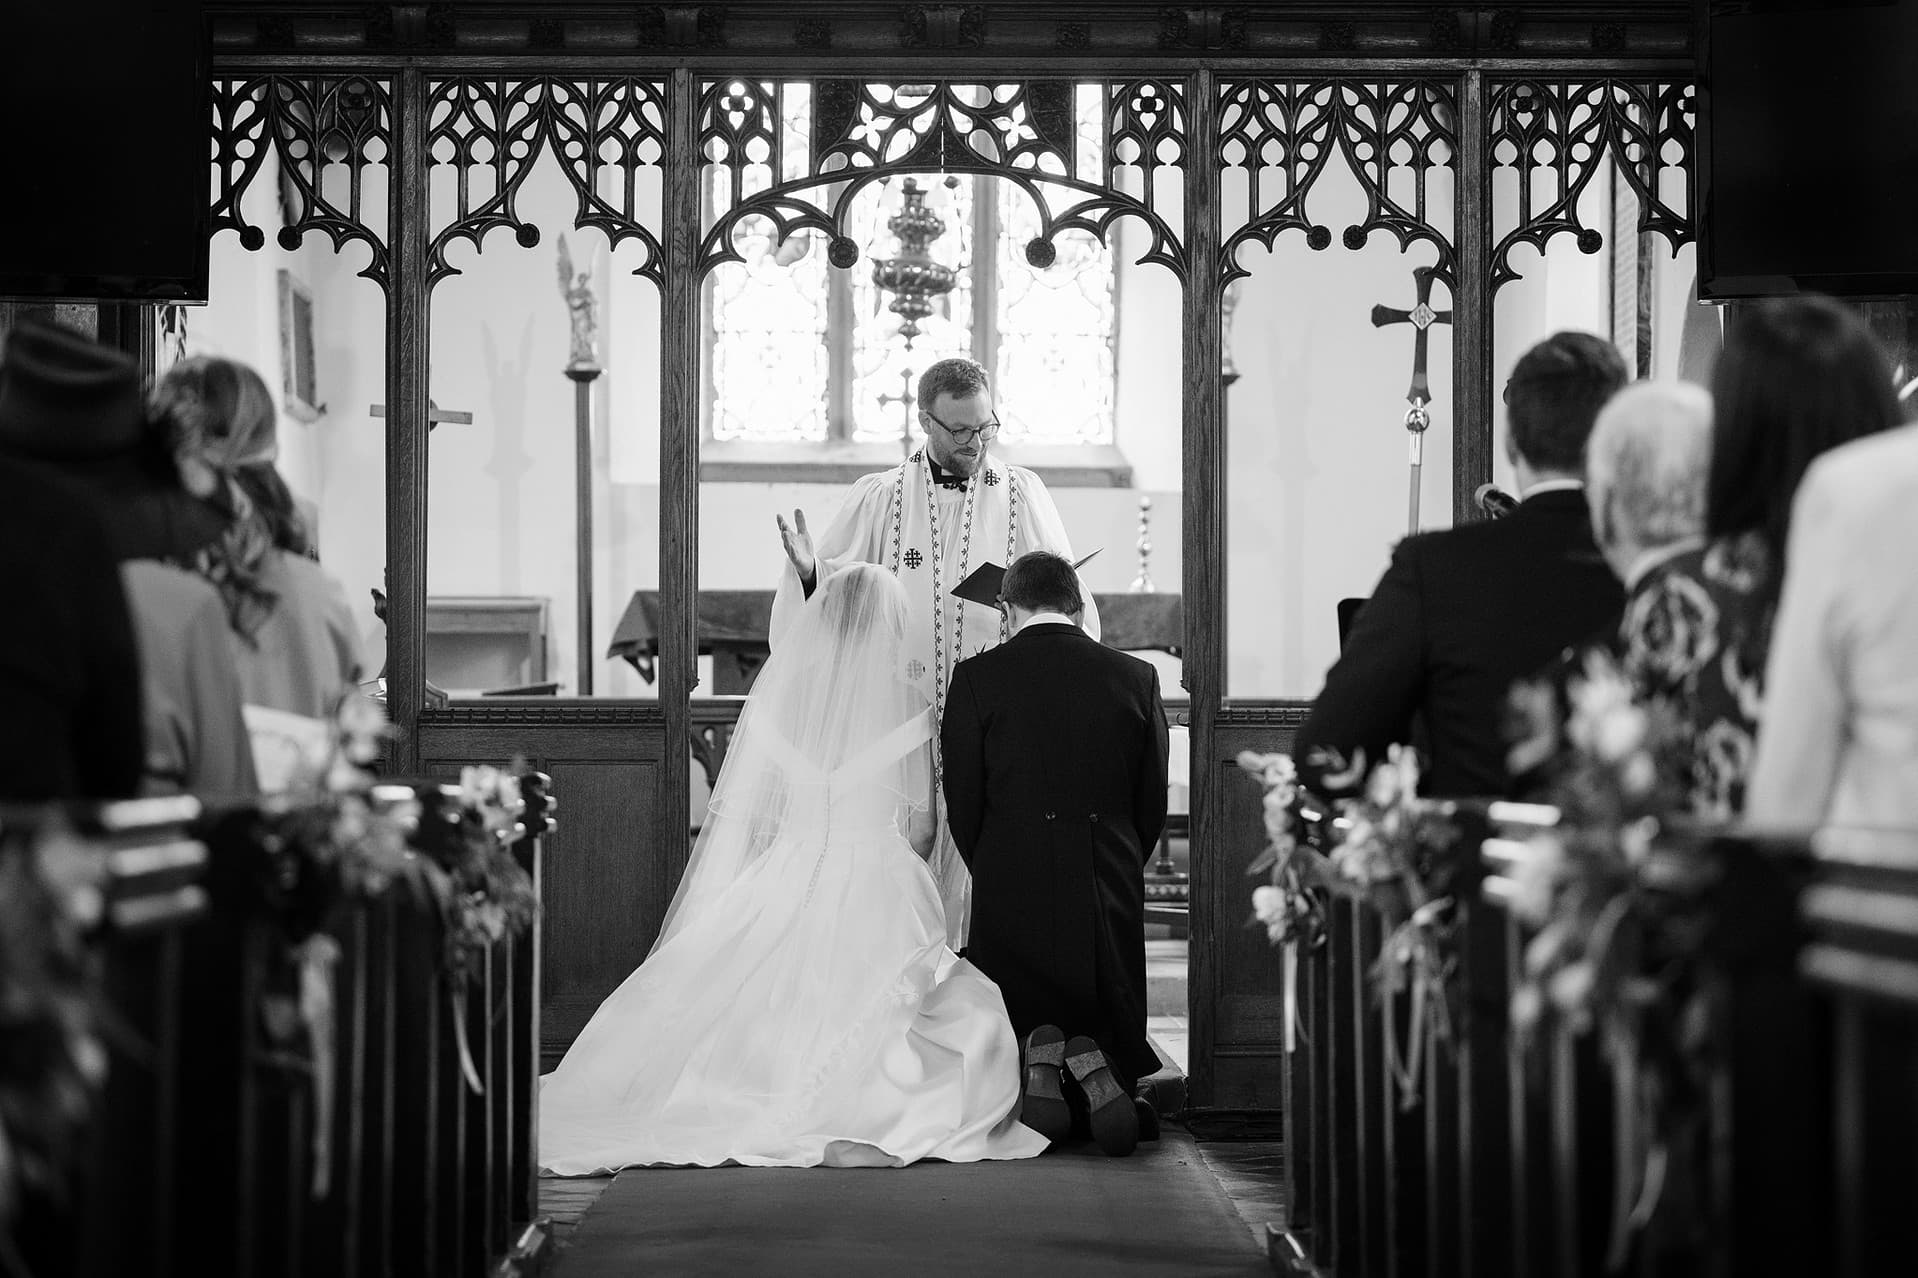 Bride and groom kneeling for the prayers at the end of their ceremony at St Catherine's church in Houghton on the Hill